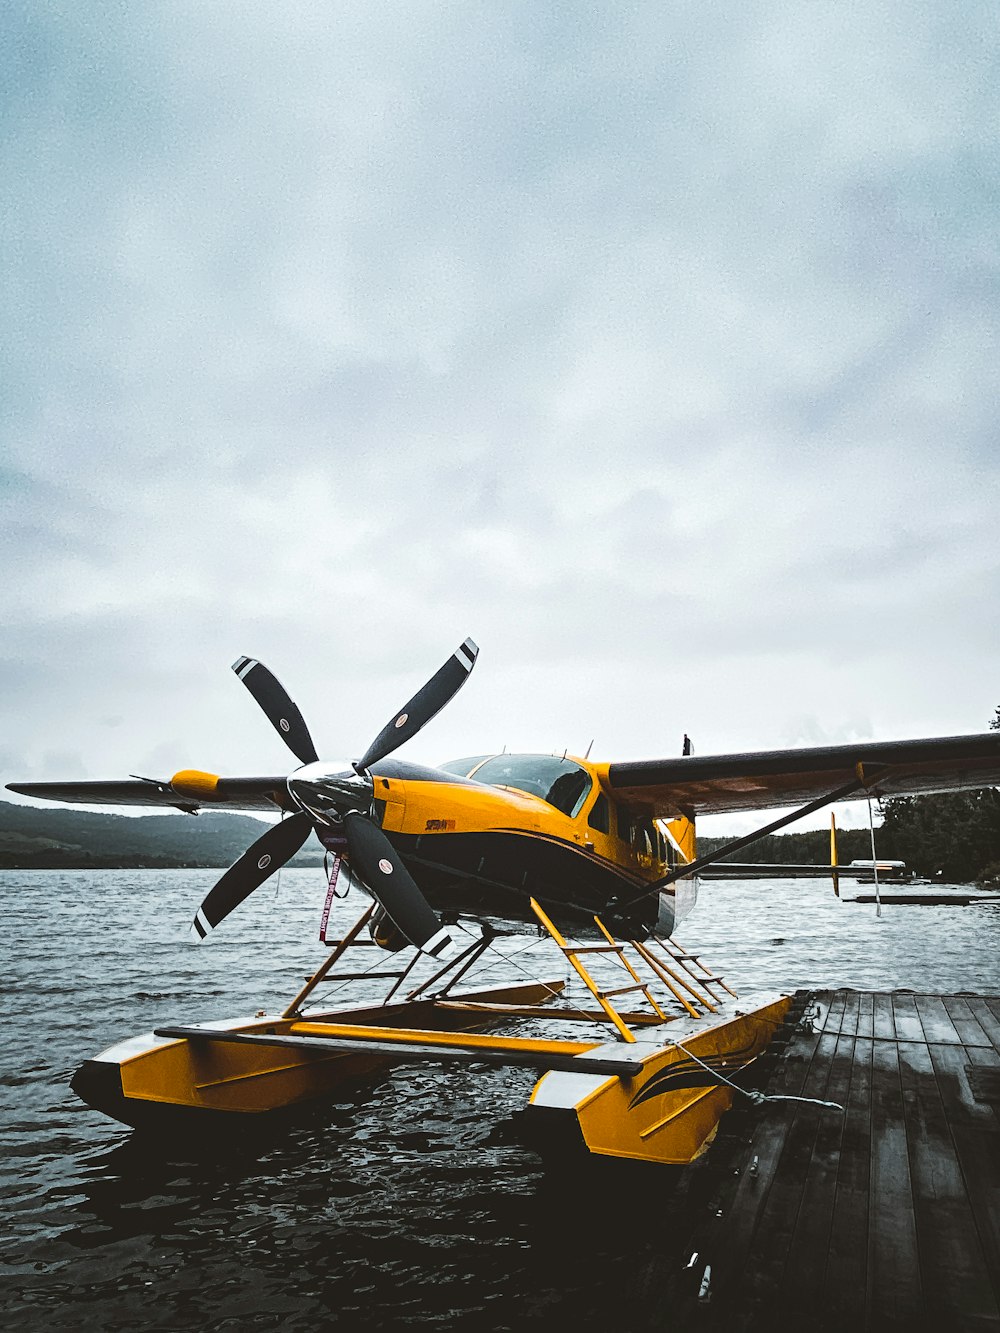 yellow and black plane on dock under white clouds during daytime